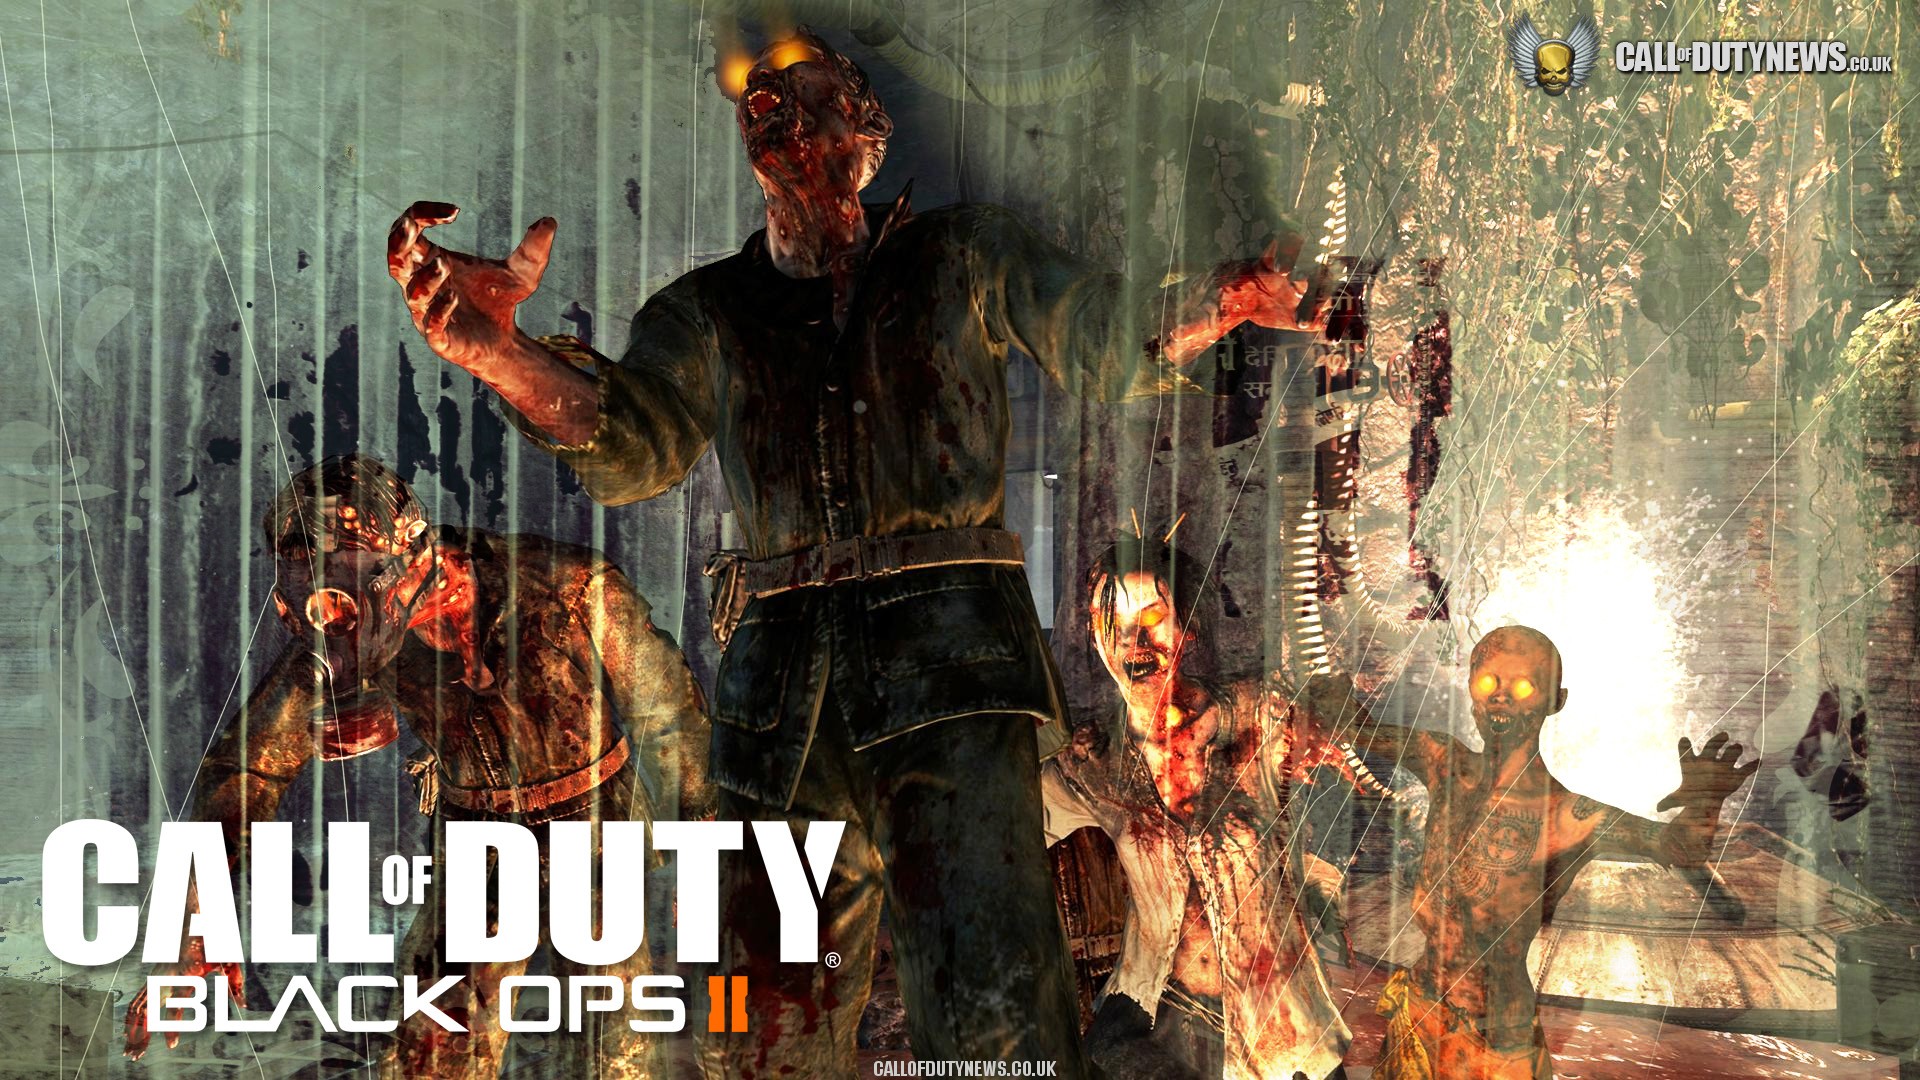 Call of duty wallpaper zombies